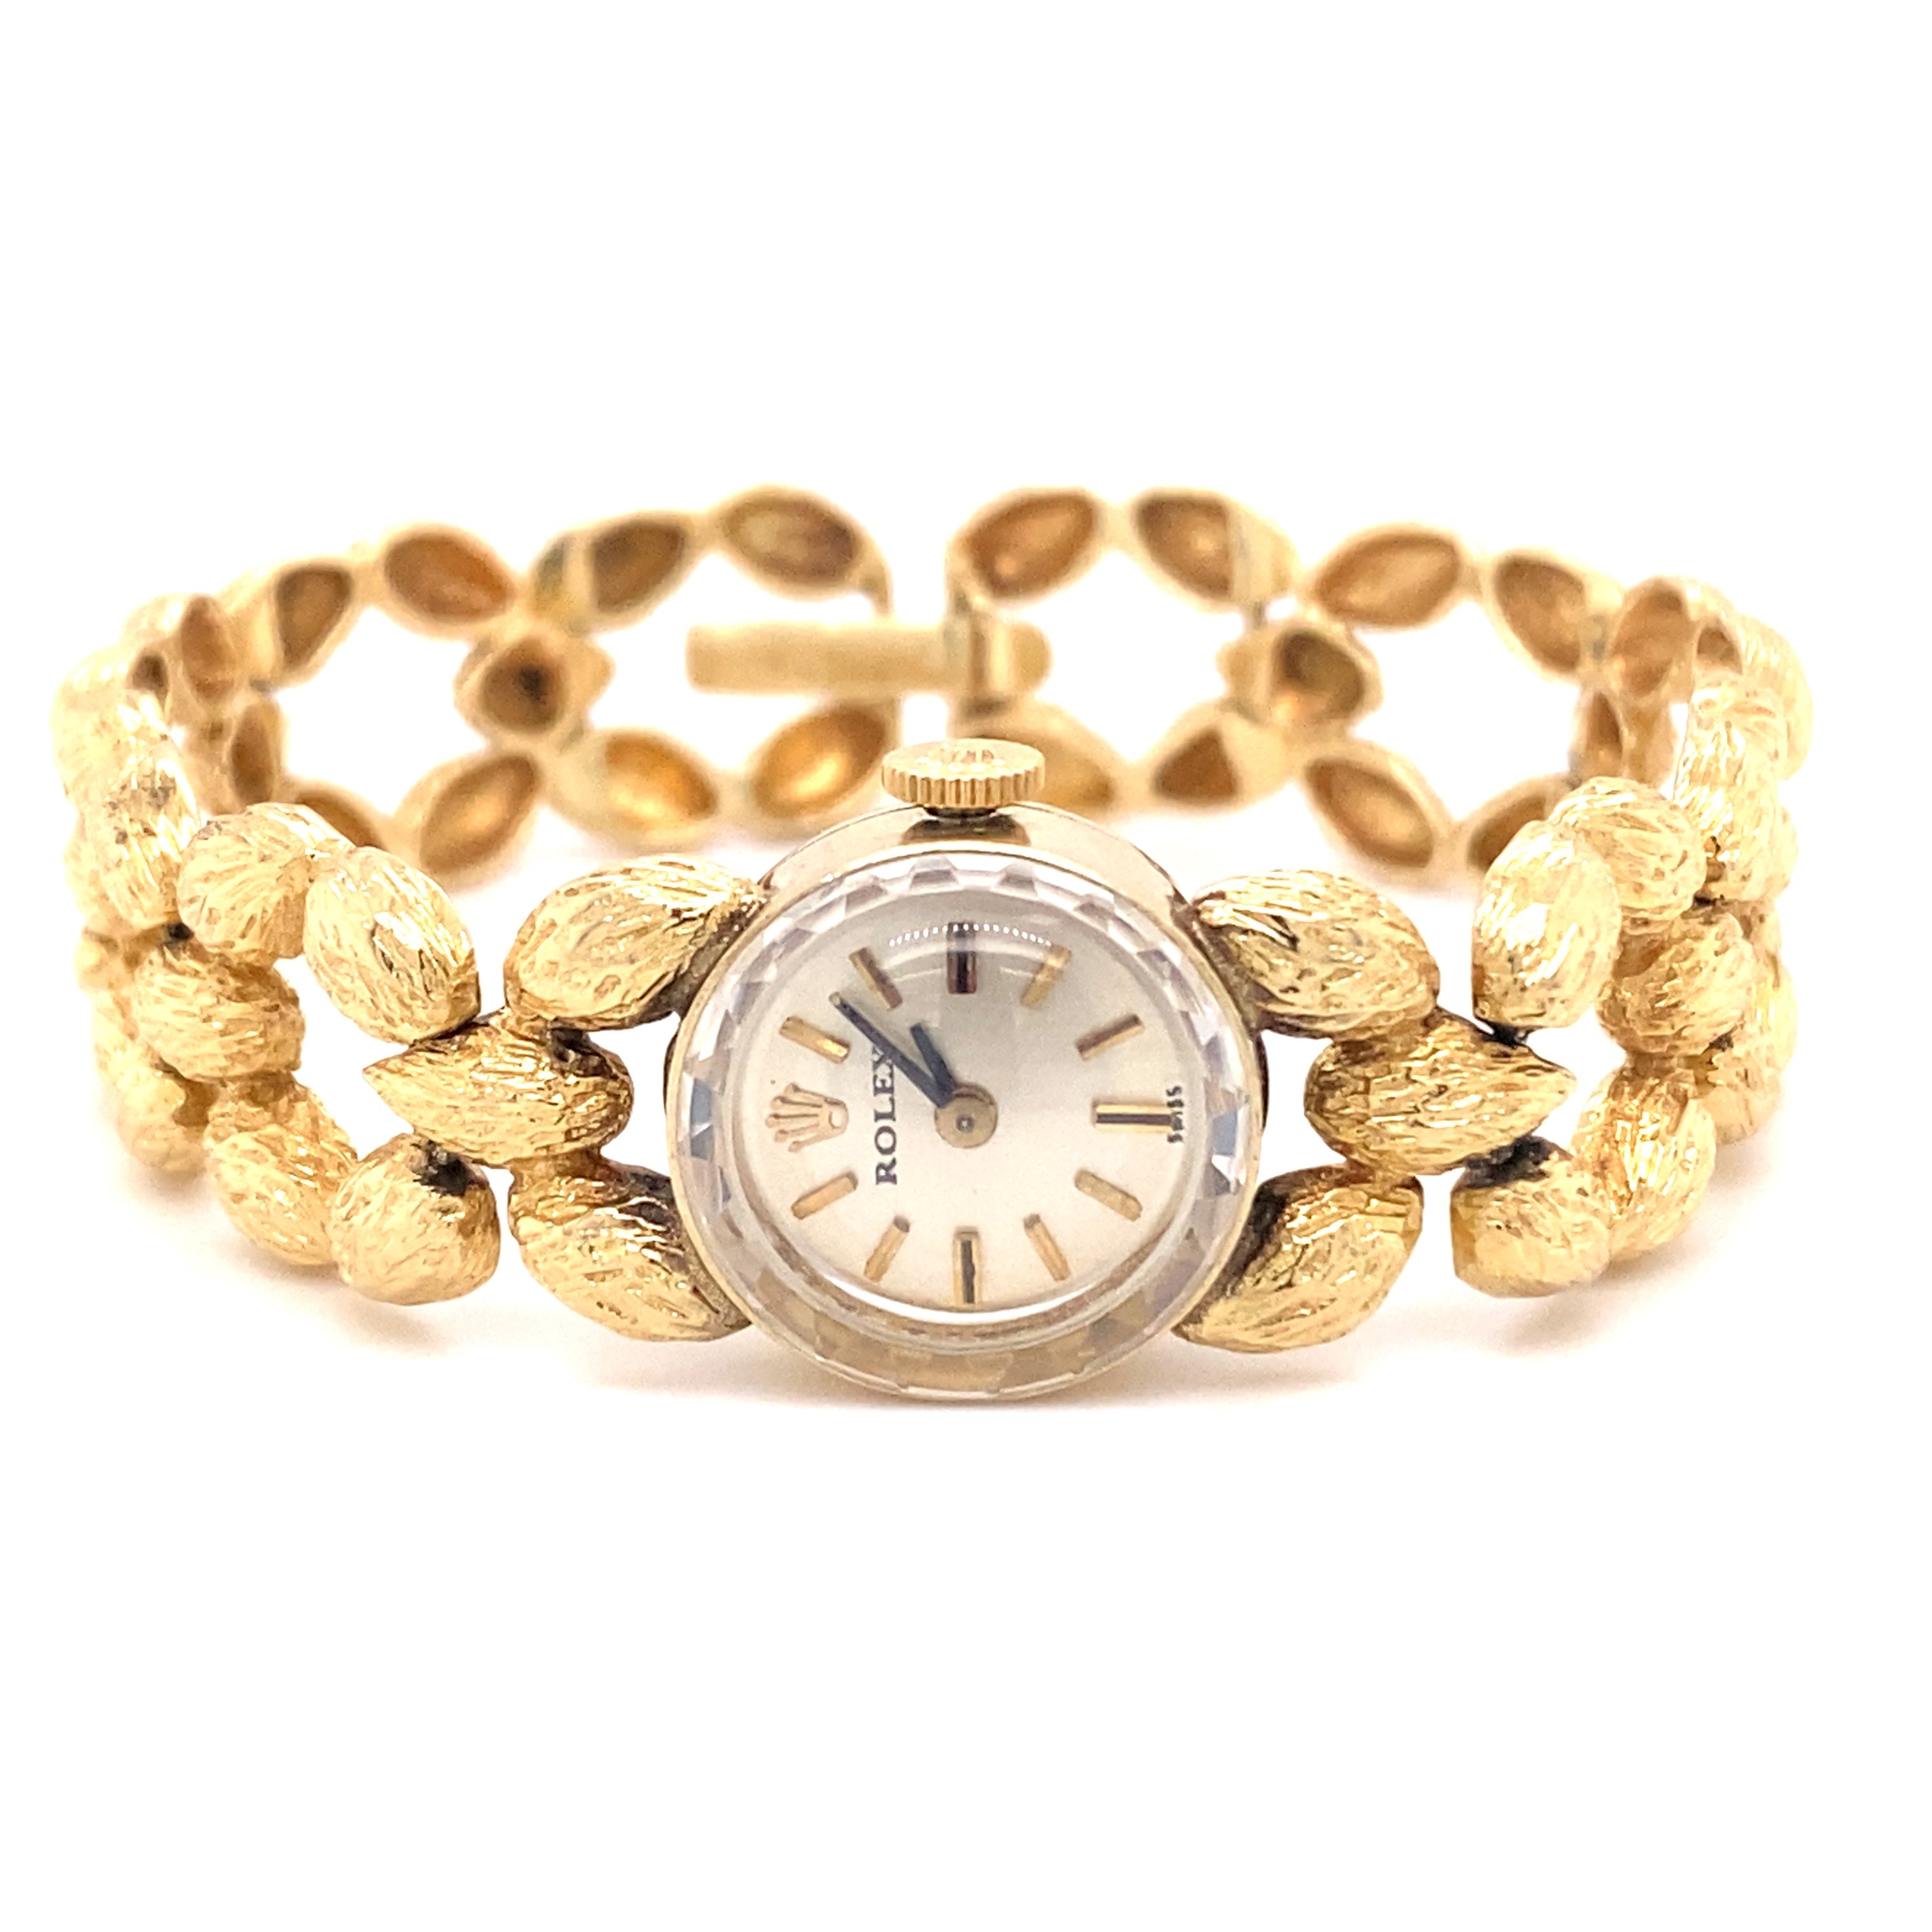 Buy Used Rolex Cocktail Cocktail | Bob's Watches - Sku: 159738